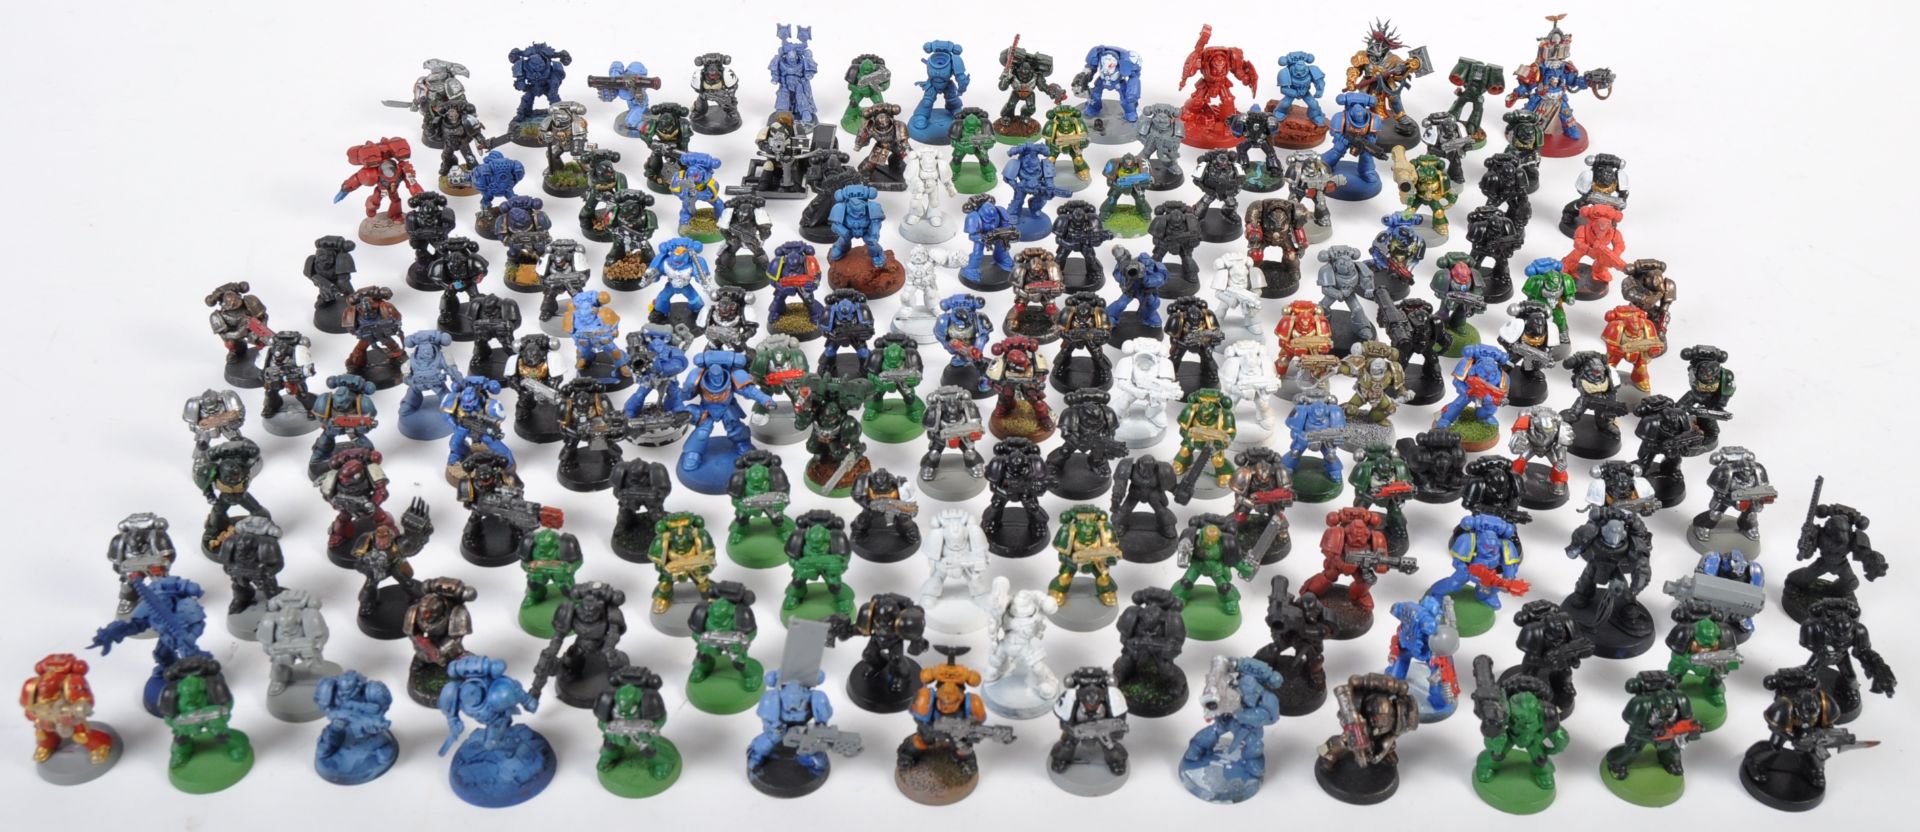 LARGE COLLECTION OF WARHAMMER 40K SPACE MARINES - Image 2 of 7